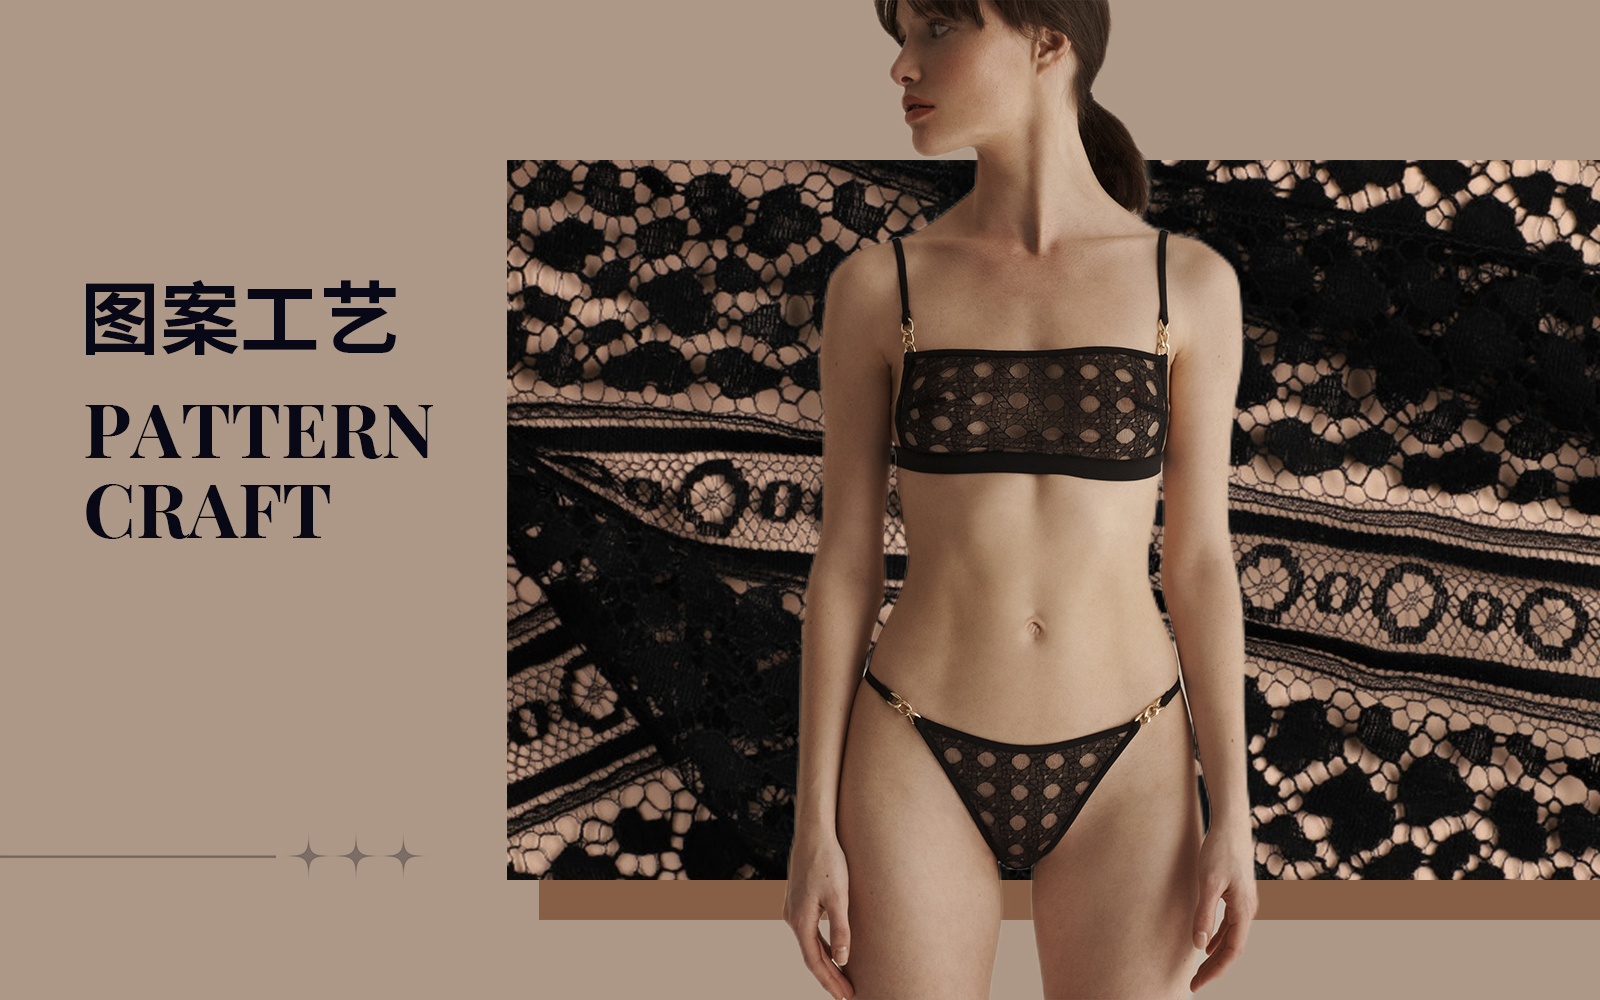 Creative Geometry -- The Pattern Craft Trend for Women's Lace Underwear